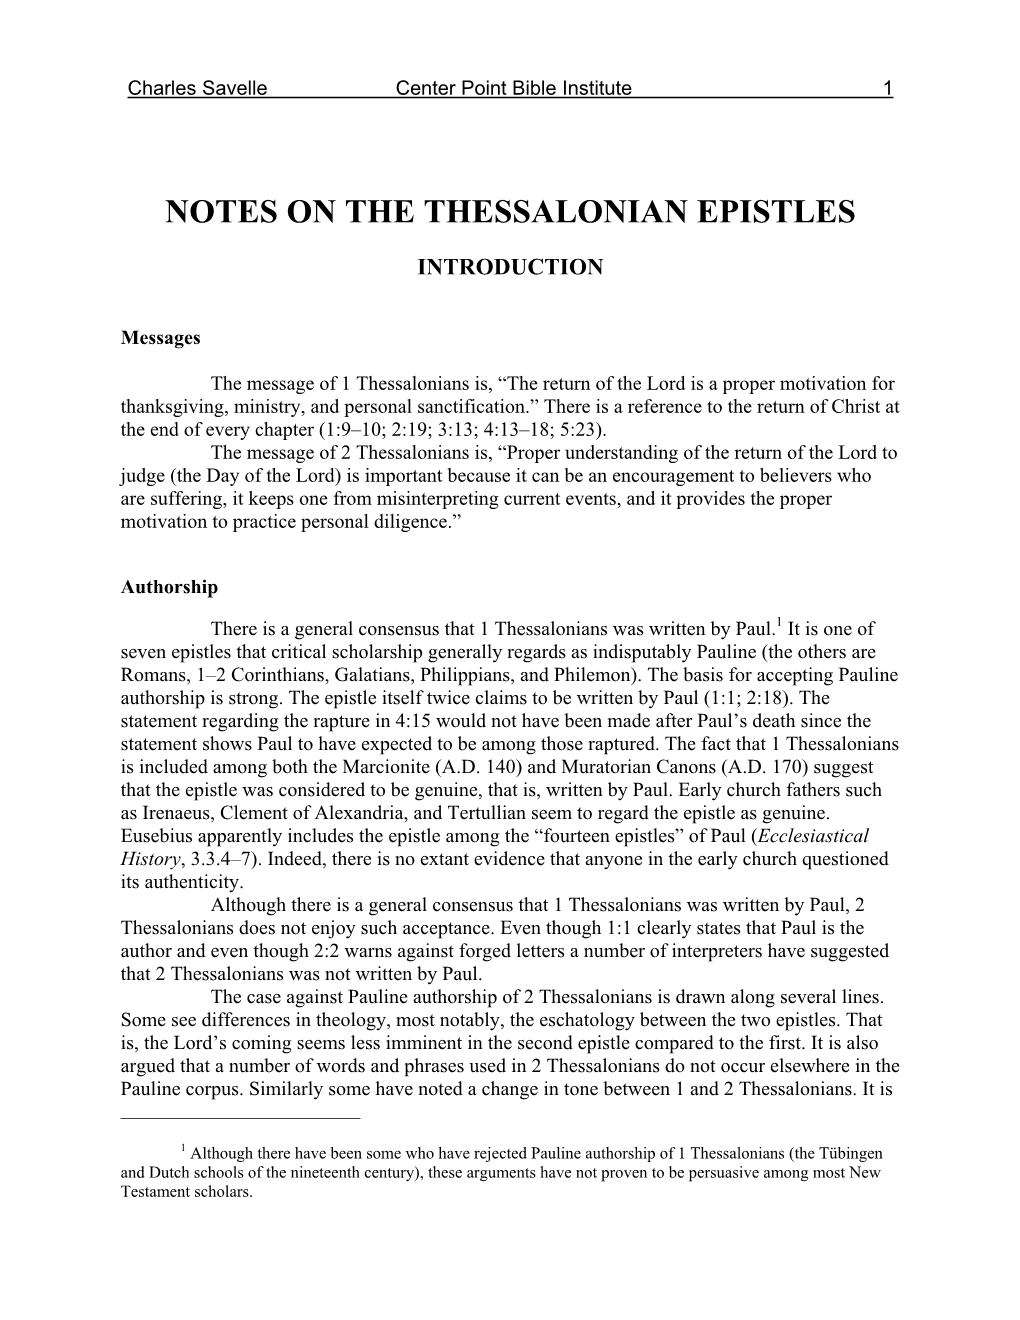 Notes on the Thessalonian Epistles